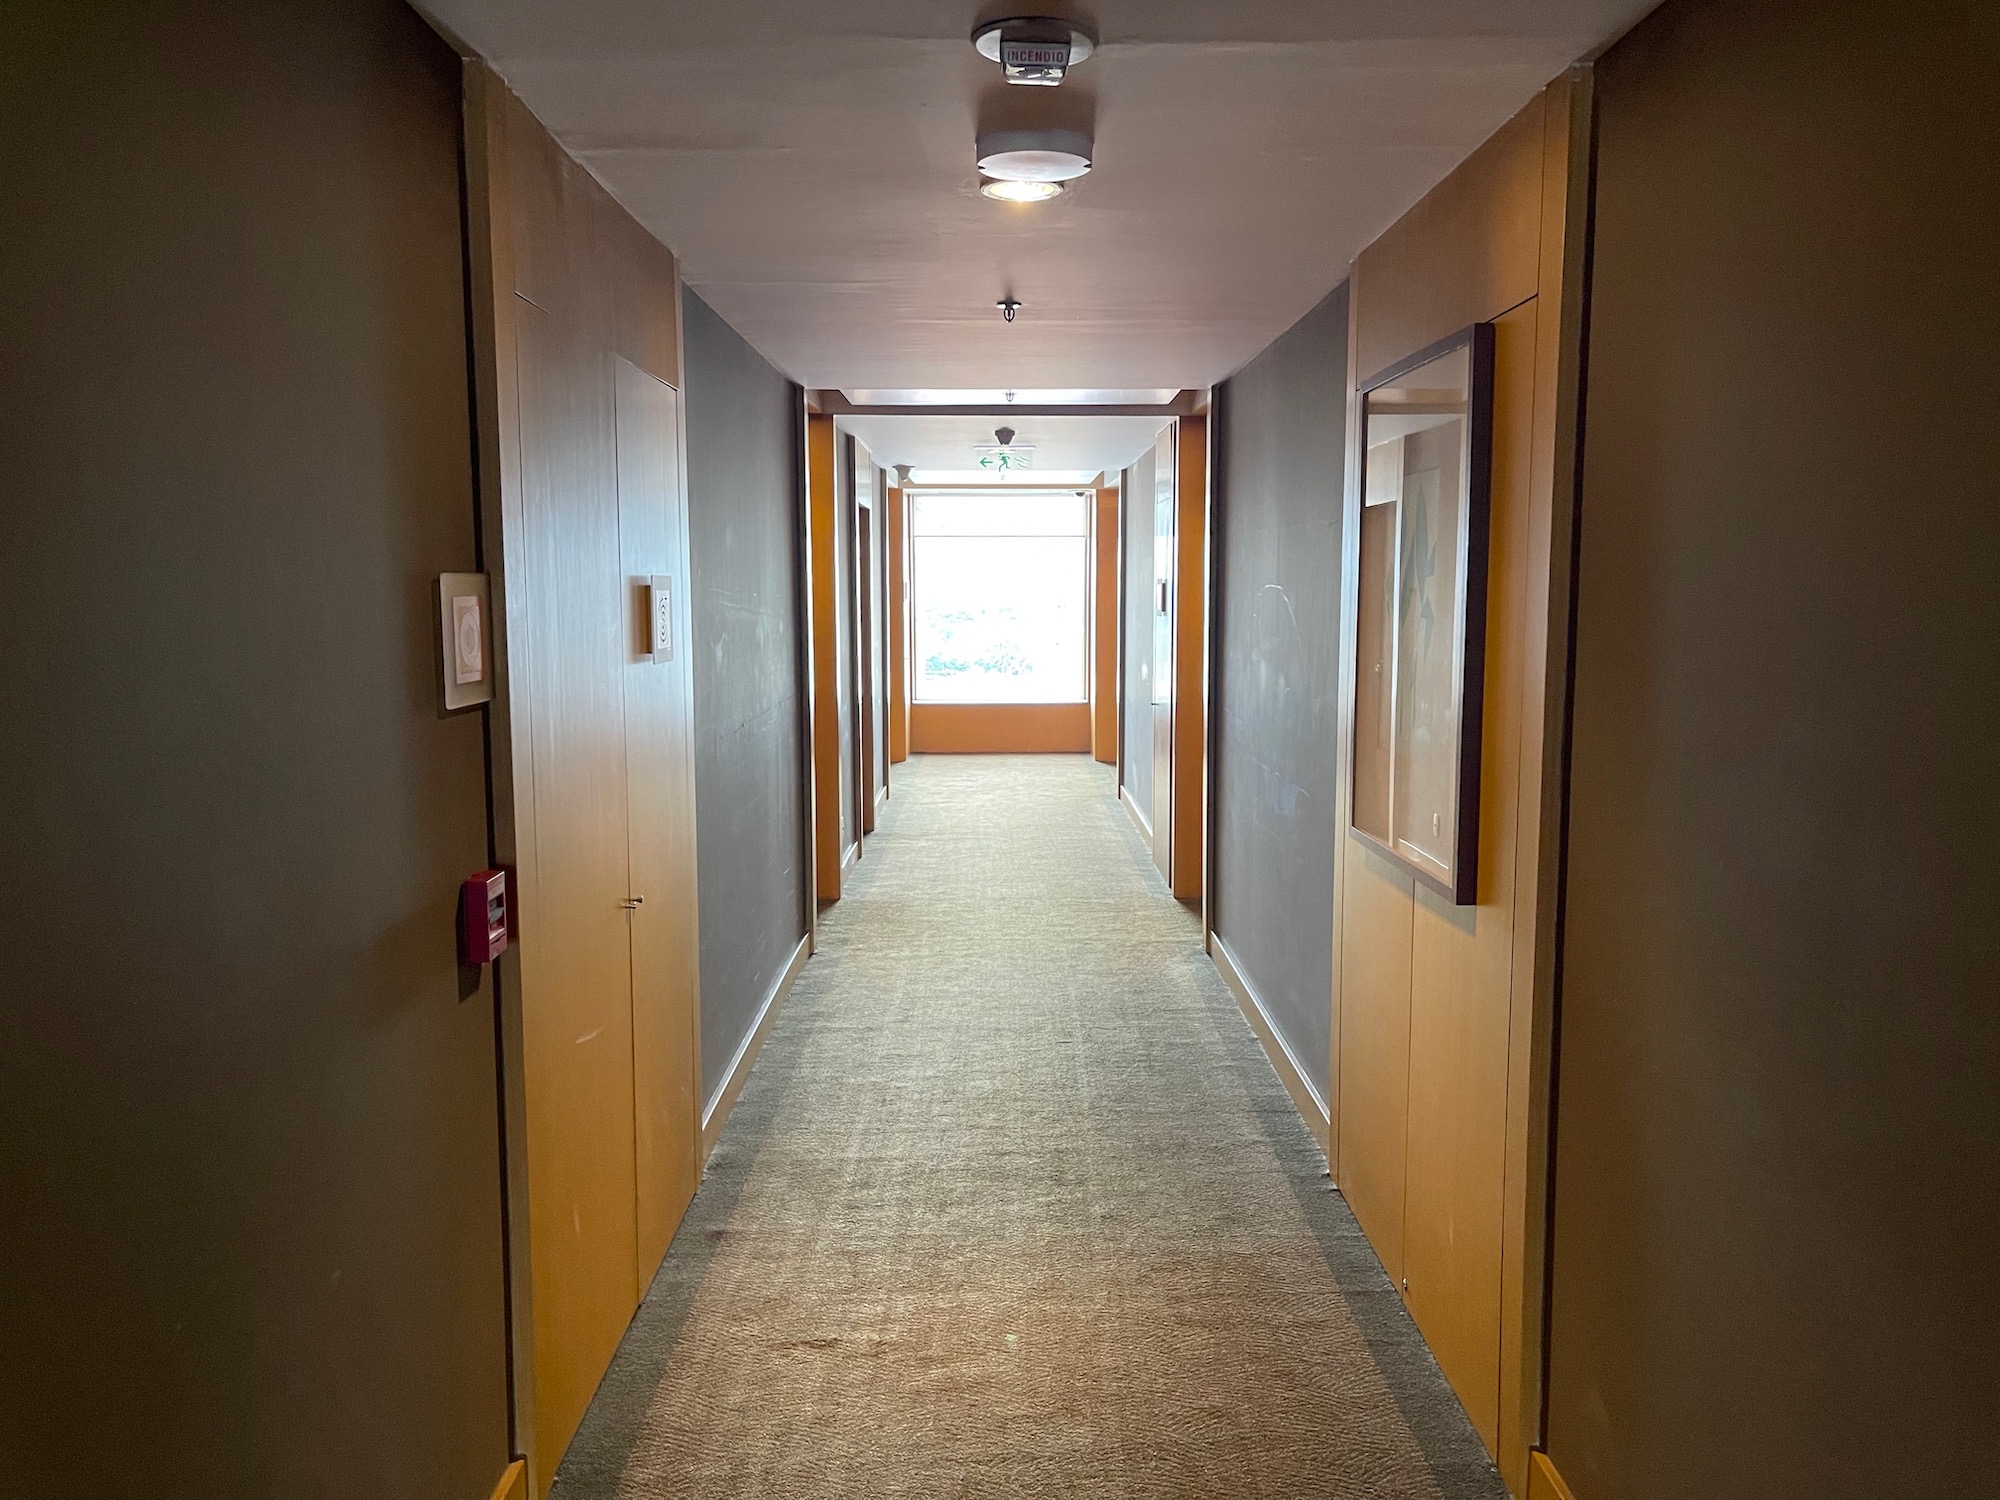 a hallway with a light on the wall